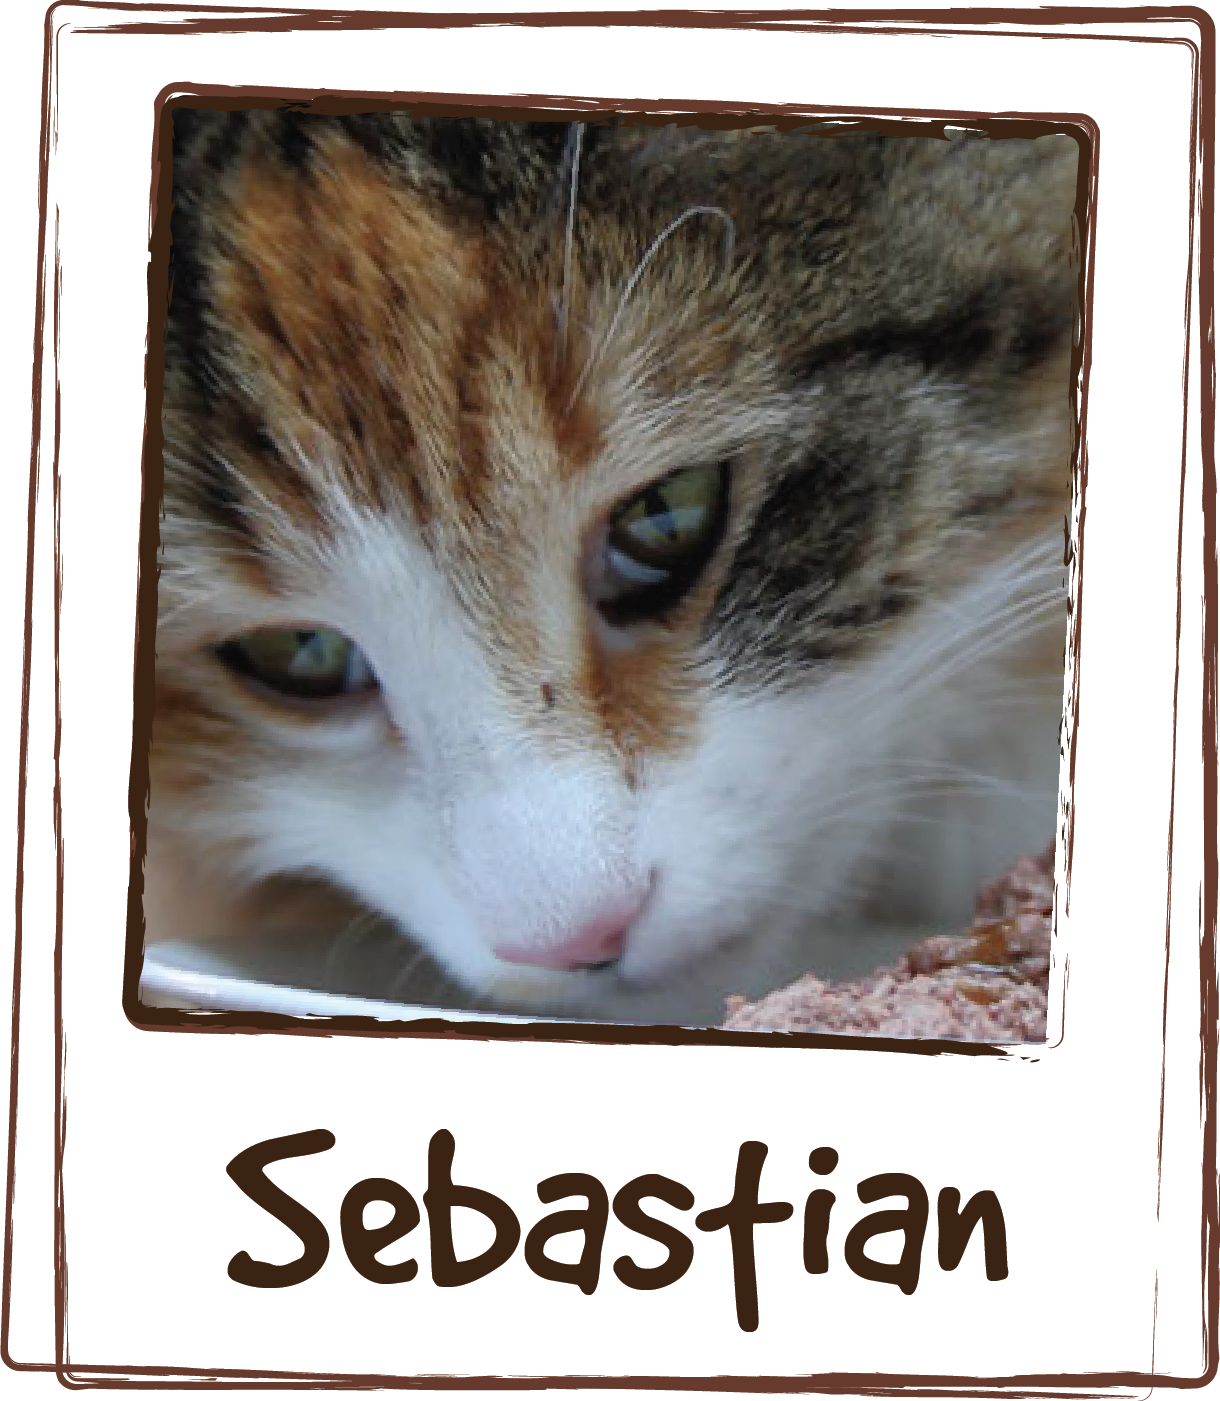  “My cat, Sebastian, started throwing up over a month ago when shedding season started. I received a couple samples of LICKS® Hairball at a trade show and decided to try it with him. He, literally, has not thrown up since. After the first two days of